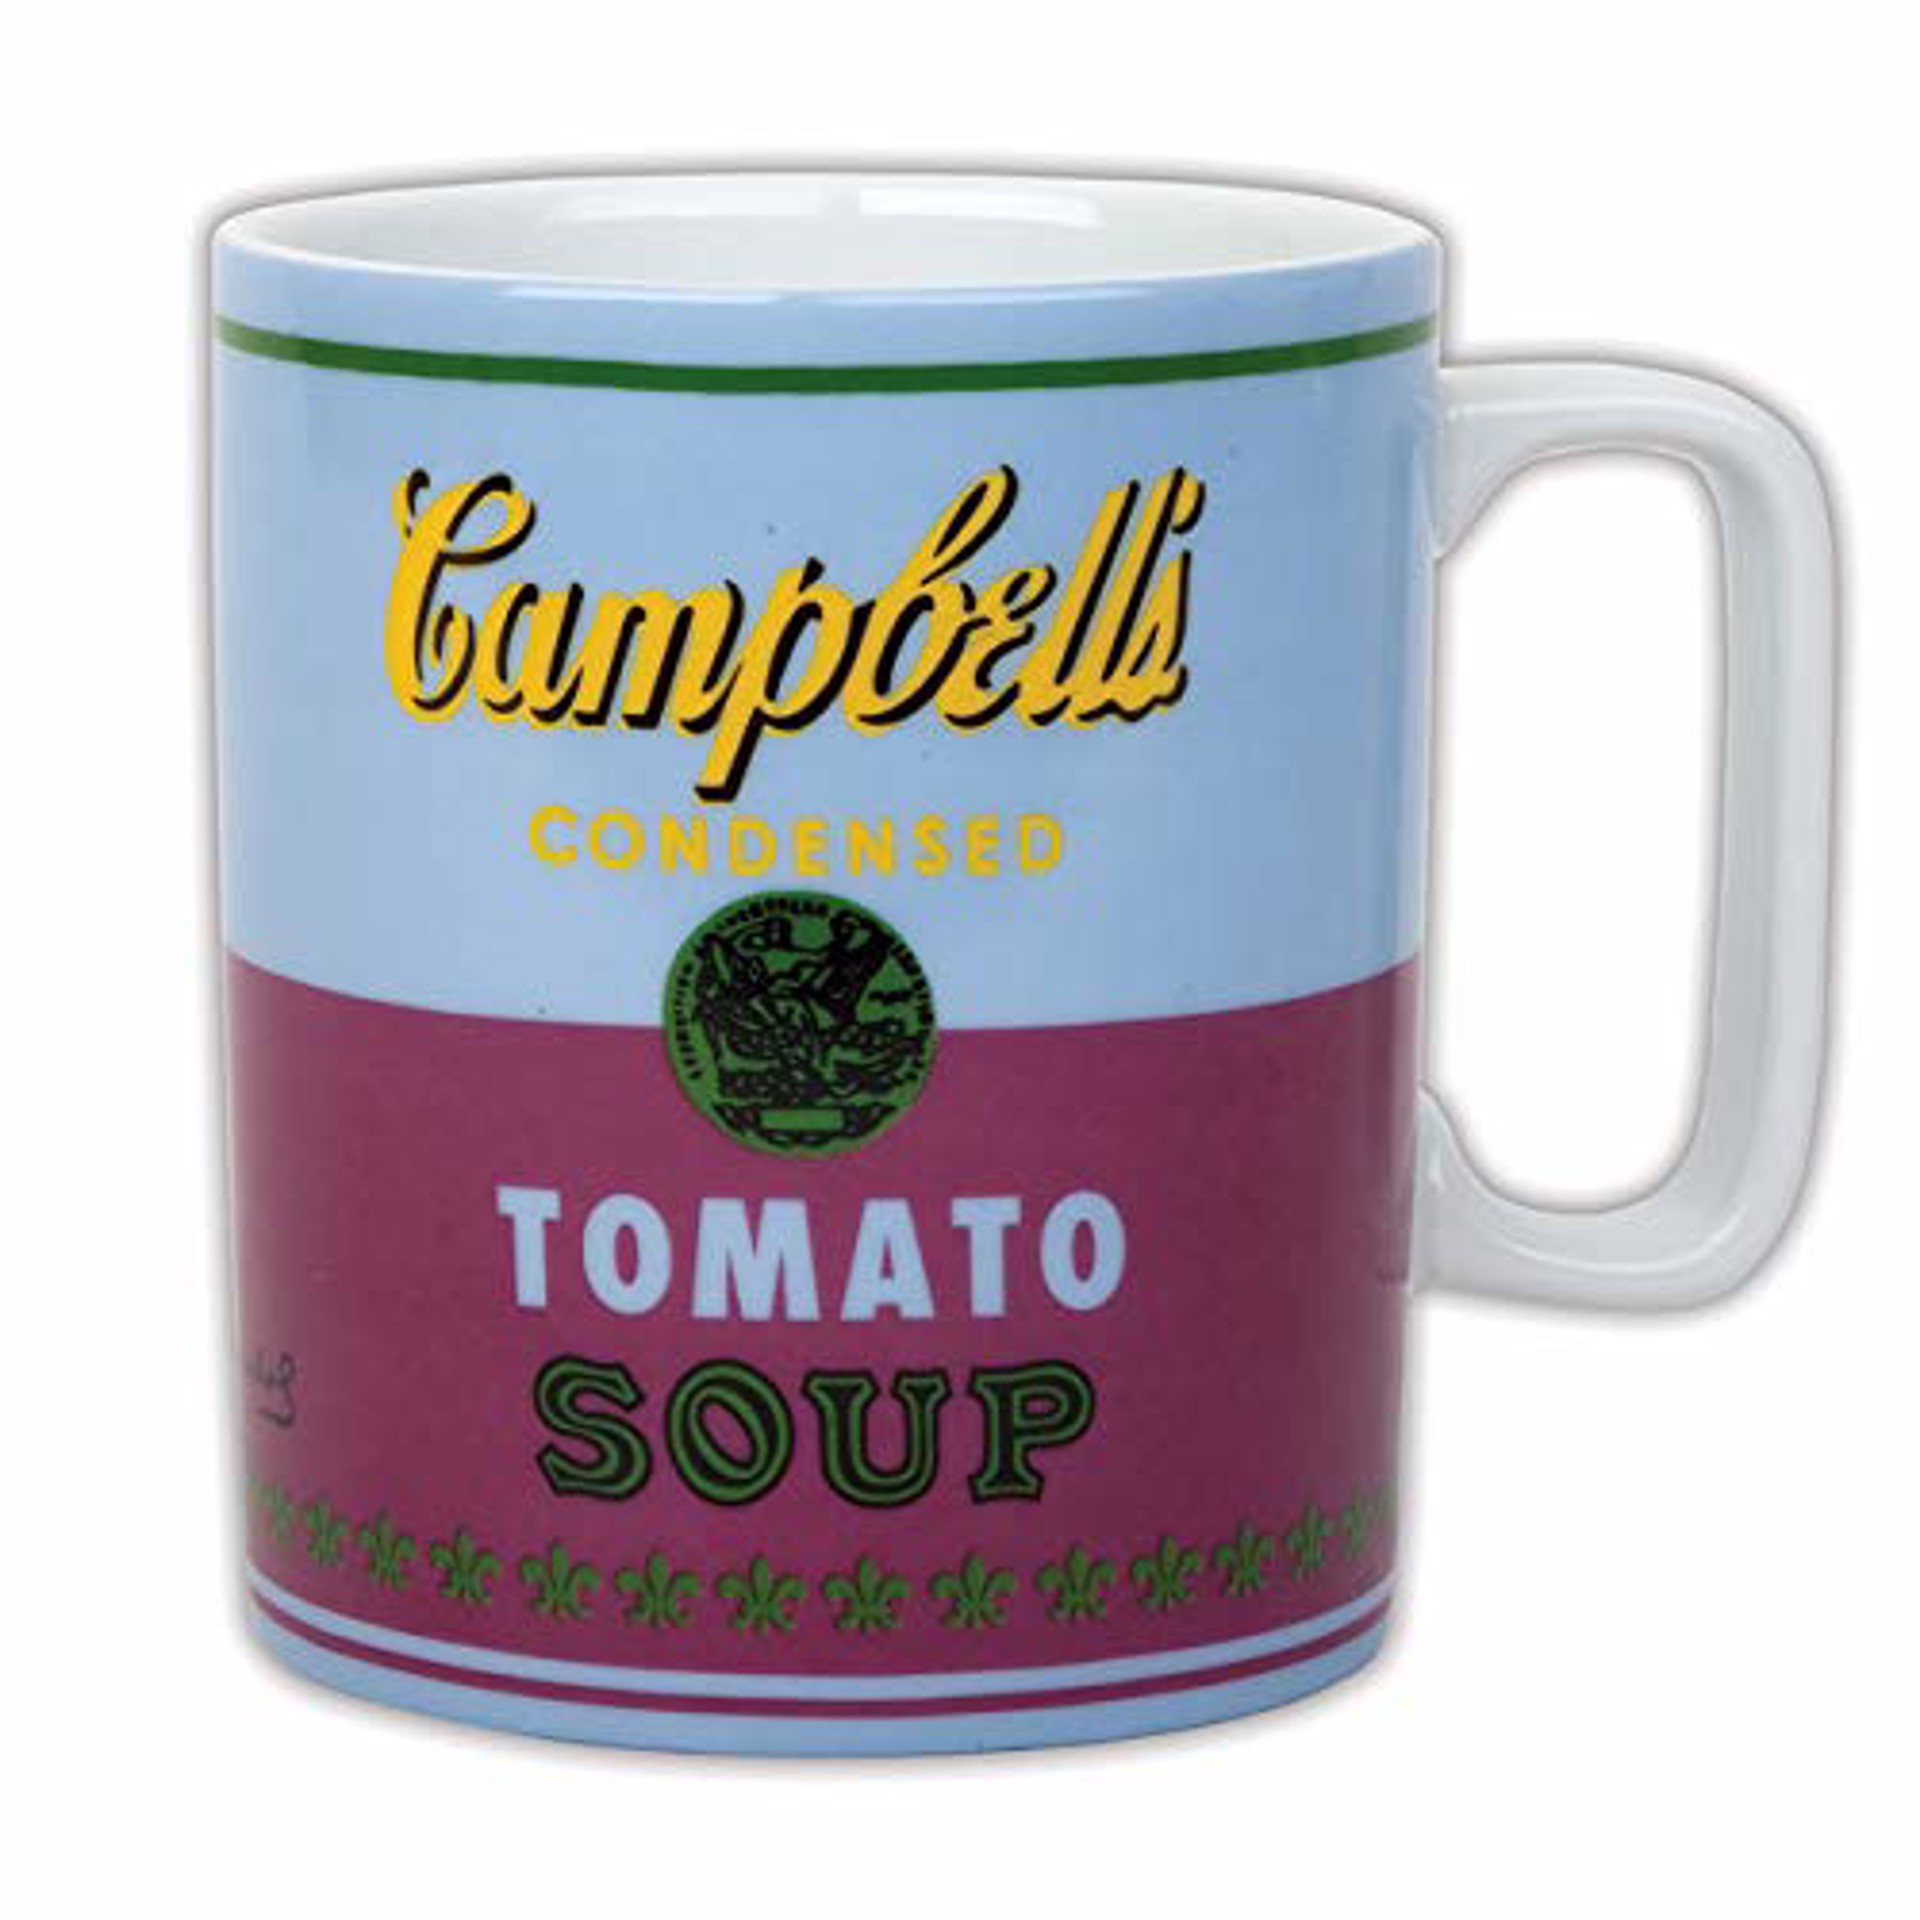 Campbell’s Soup Blue Mug by Andy Warhol